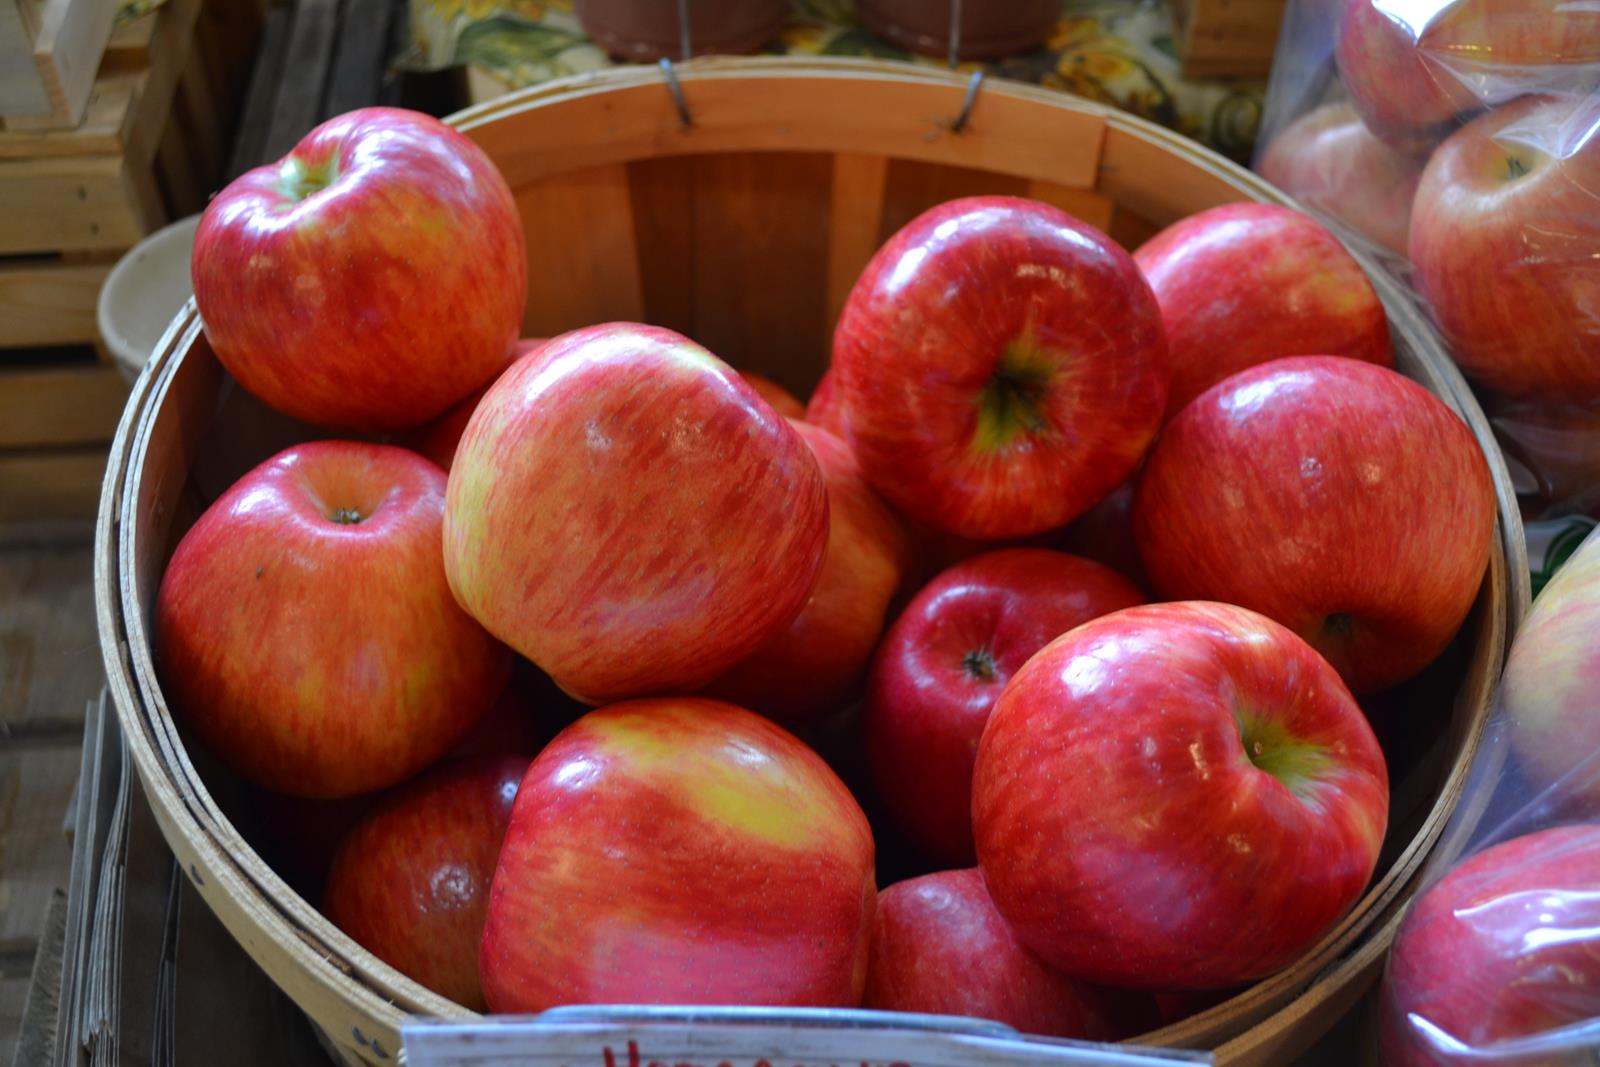 Apples on sale at Lautenbach’s Orchard County Market & Winery